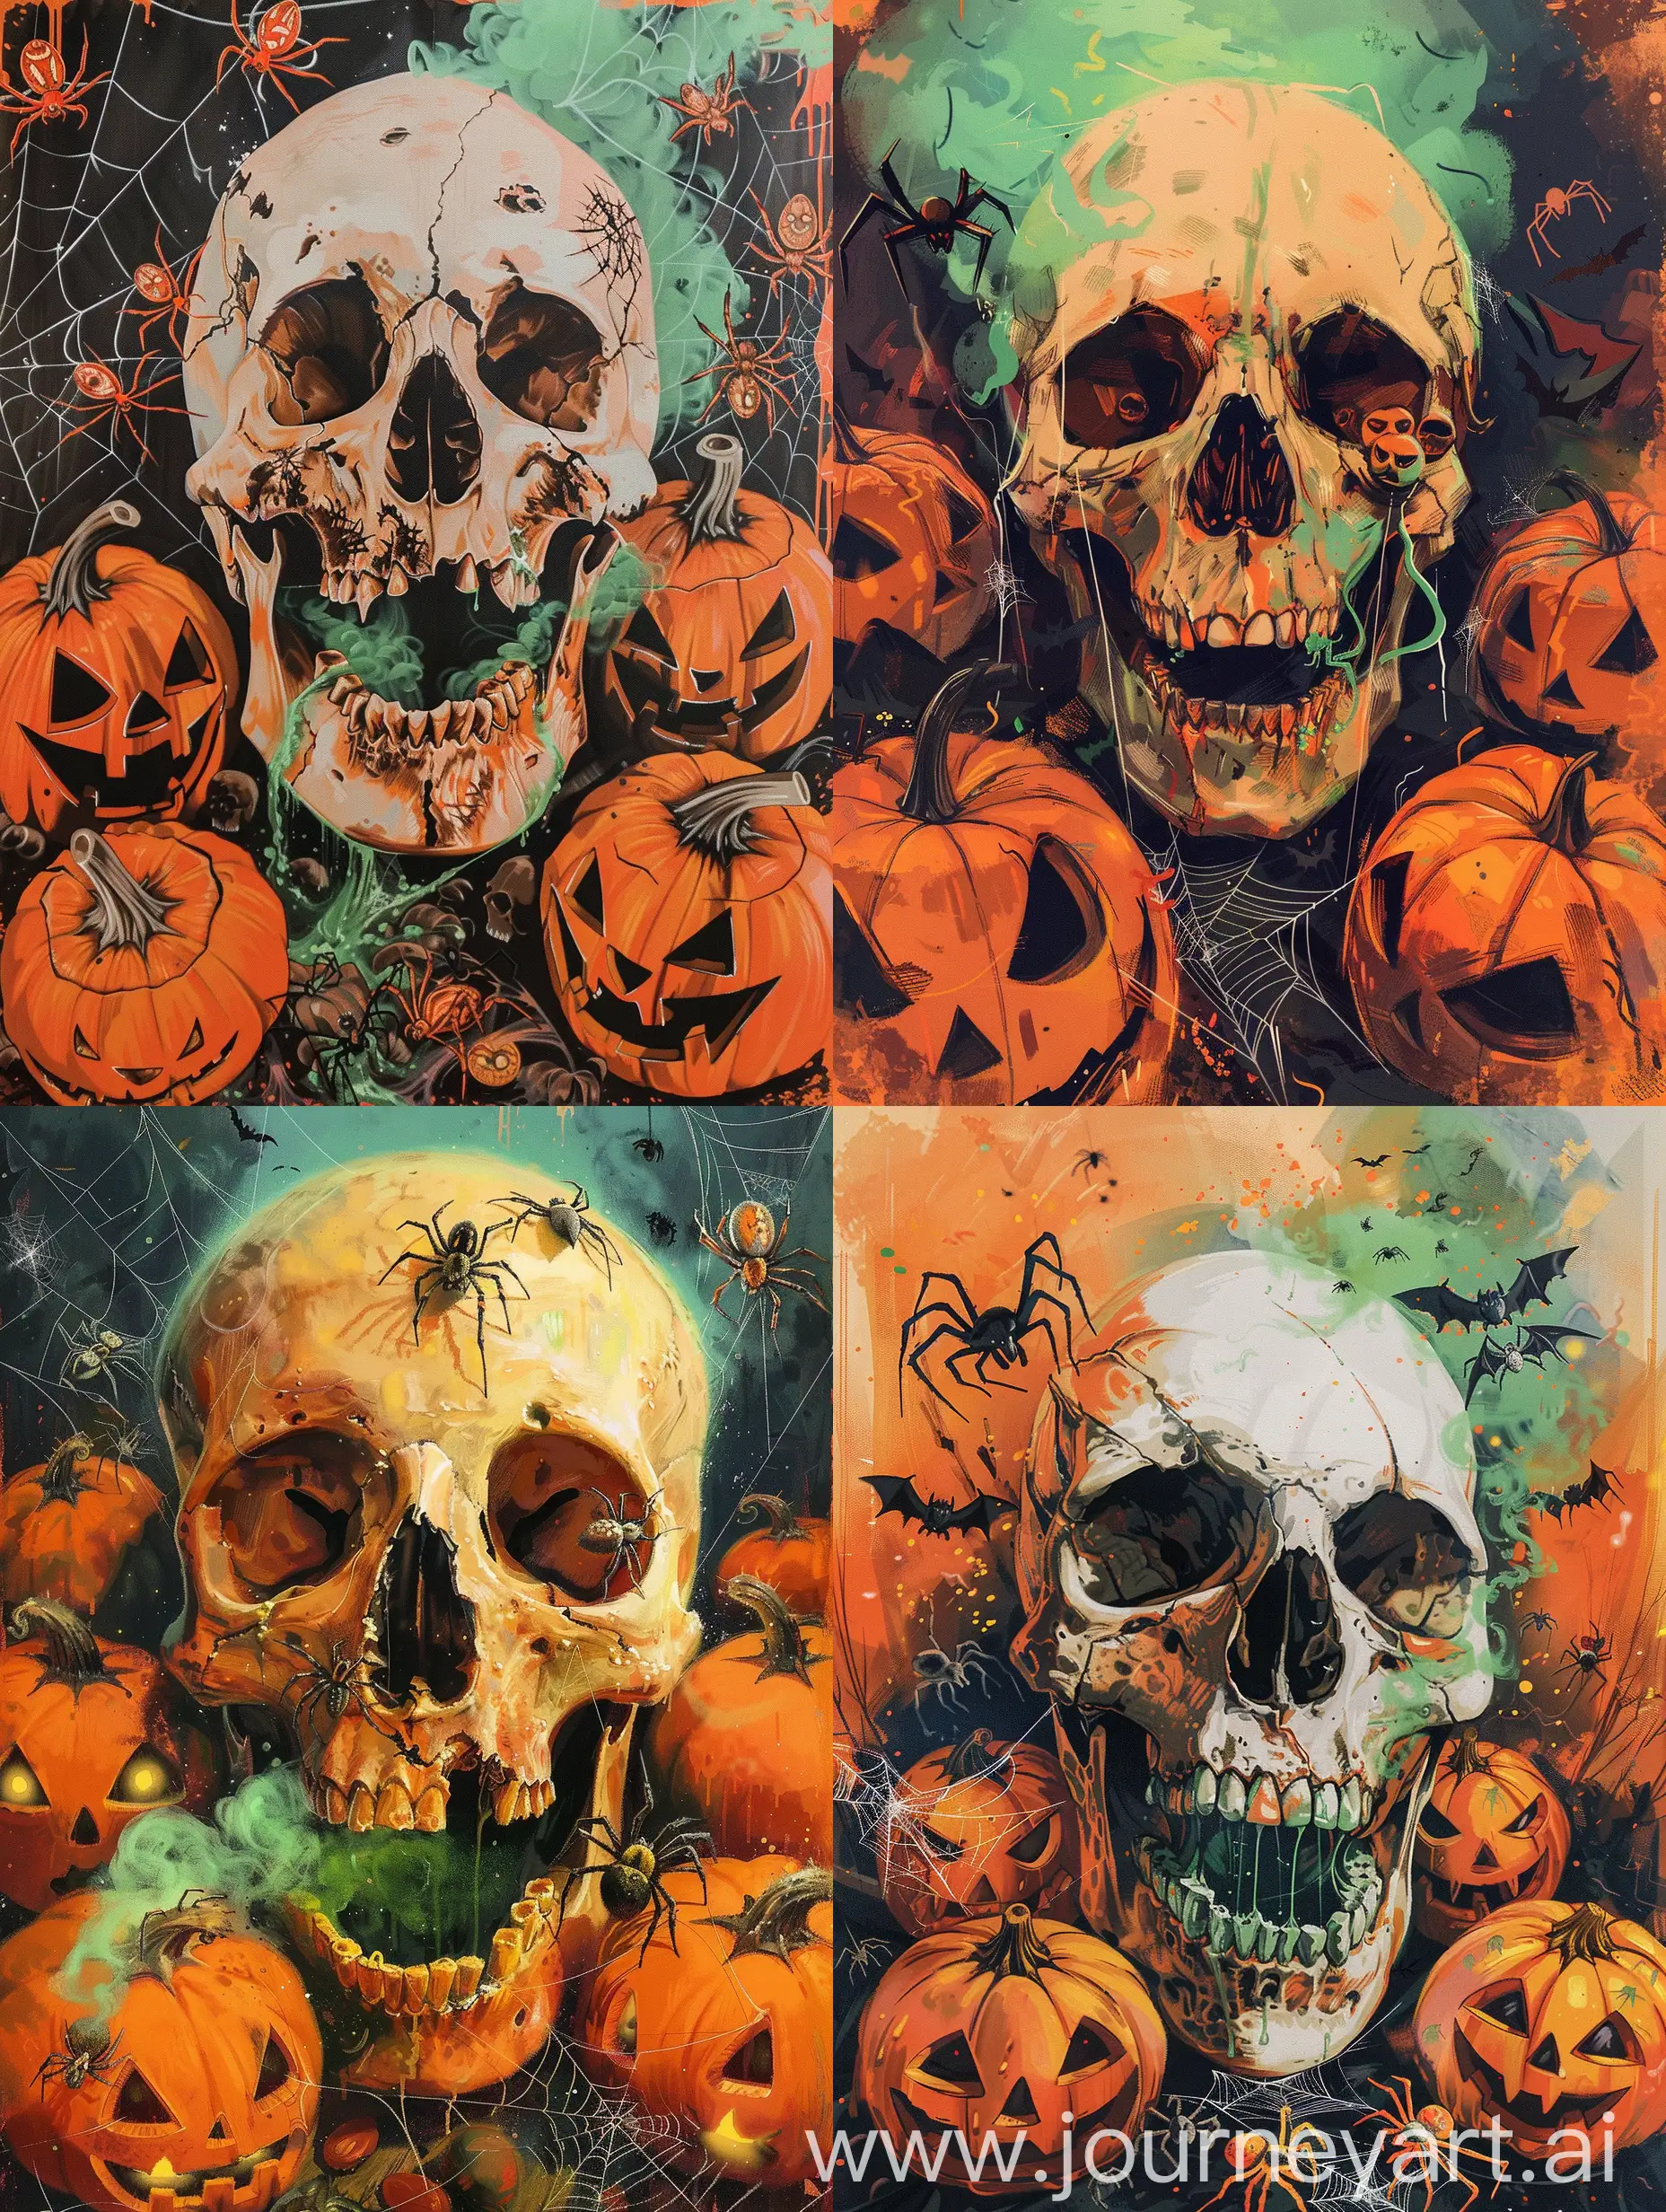 Artistic style: 1. Use hard, clear lines to create a poster effect. 2. Pay attention to details and contrasting colors to create an expressive image.  Composition: 3. Place the skull in the center of the composition to attract the viewer's attention. 4. Place pumpkins with different scary grimaces around the skull, creating a Halloween atmosphere. 5. Add spiders of different sizes crawling on pumpkins to enhance the horror effect.  Color scheme: 6. Use bright orange and black colors for pumpkins and spiders to highlight the Halloween theme. 7. Add green smoke coming out of the open mouth of the skull to create a mysterious and unusual effect.  The mood of the painting: 8. Create an atmosphere of horror and mystery to evoke an emotional response from the audience. 9. Add cobwebs in the four corners of the image to enhance the horror effect and highlight the Halloween theme.